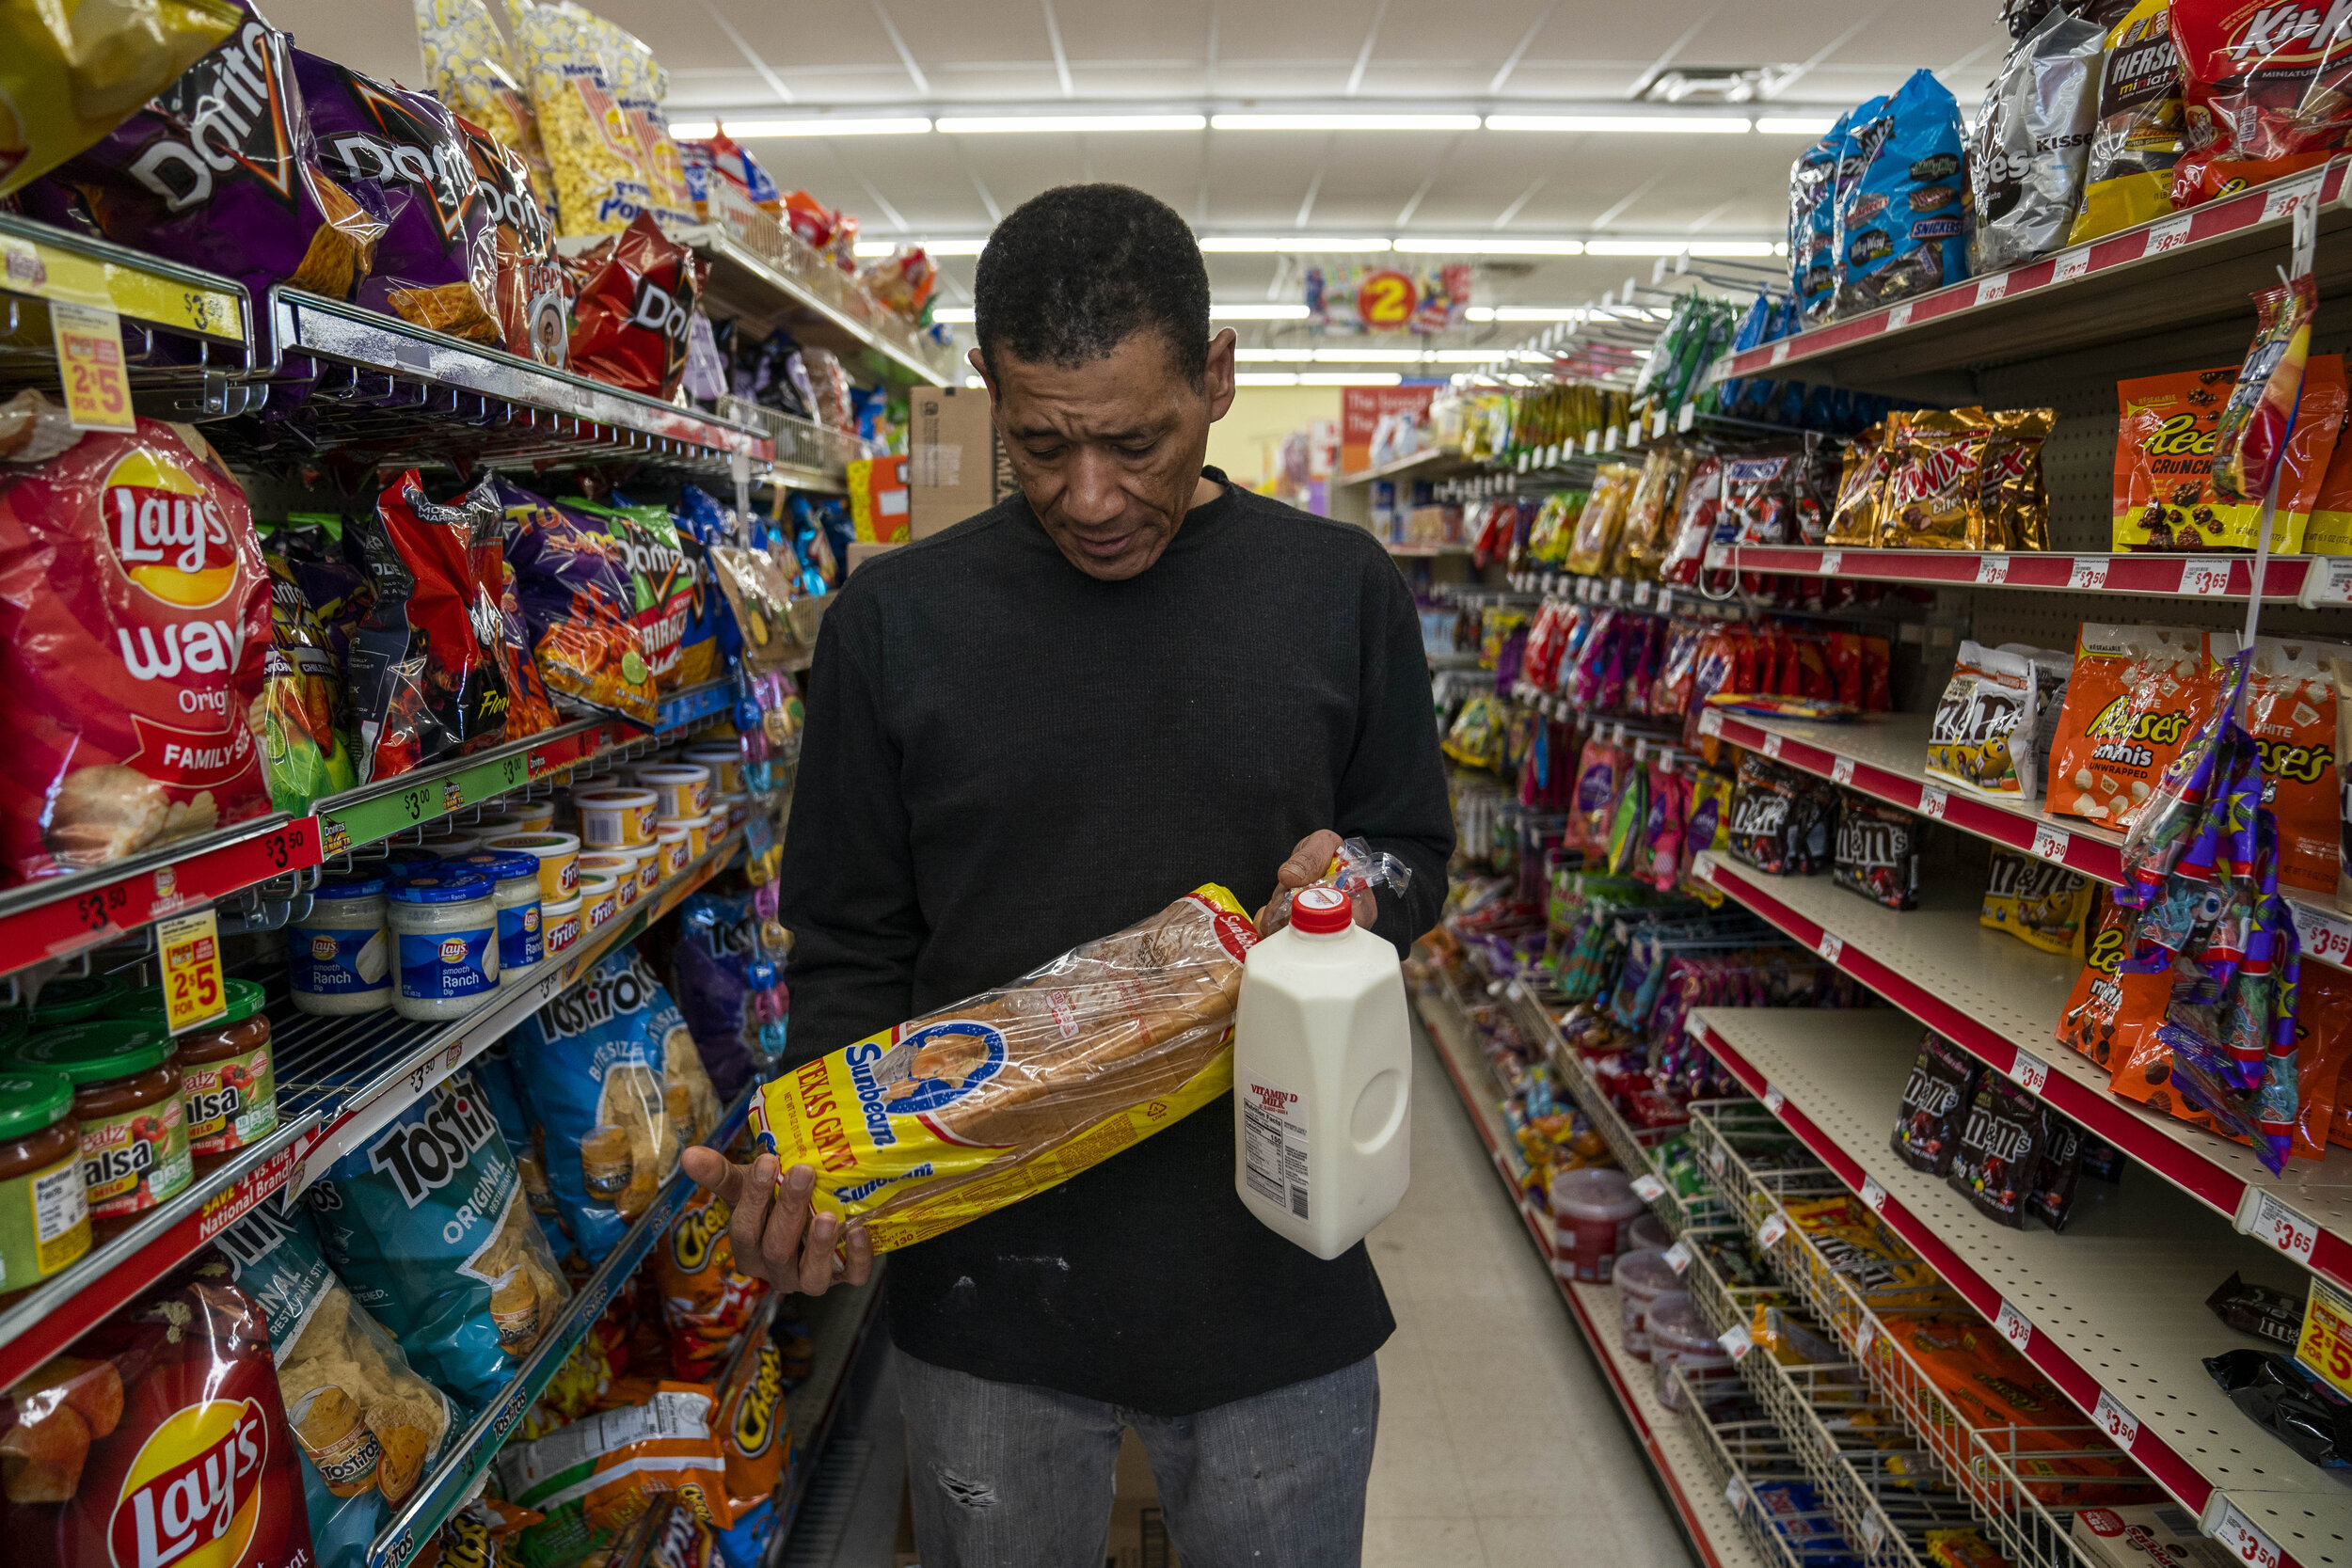  Gregory McCauley picks up some bread and milk at Family Dollar during his break in Oklahoma City, Oklahoma, December 13, 2019. Dollar stores are the only available grocery’s available in Gregory’s zip code which is classified as a Food Desert. Nick 